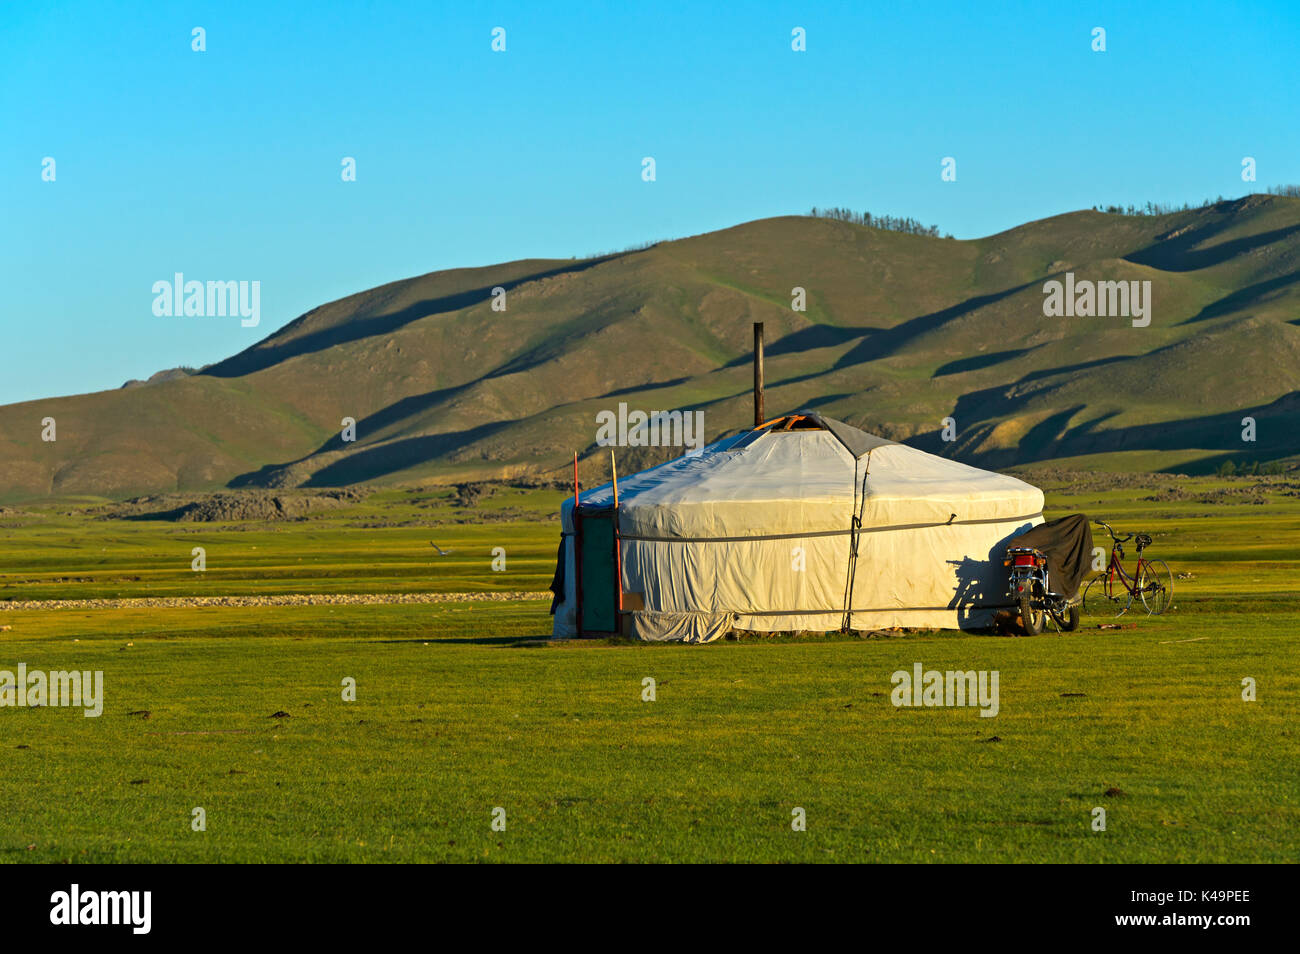 Yurt Of A Nomad Family In The Orkhon Valley, Mongolia Stock Photo